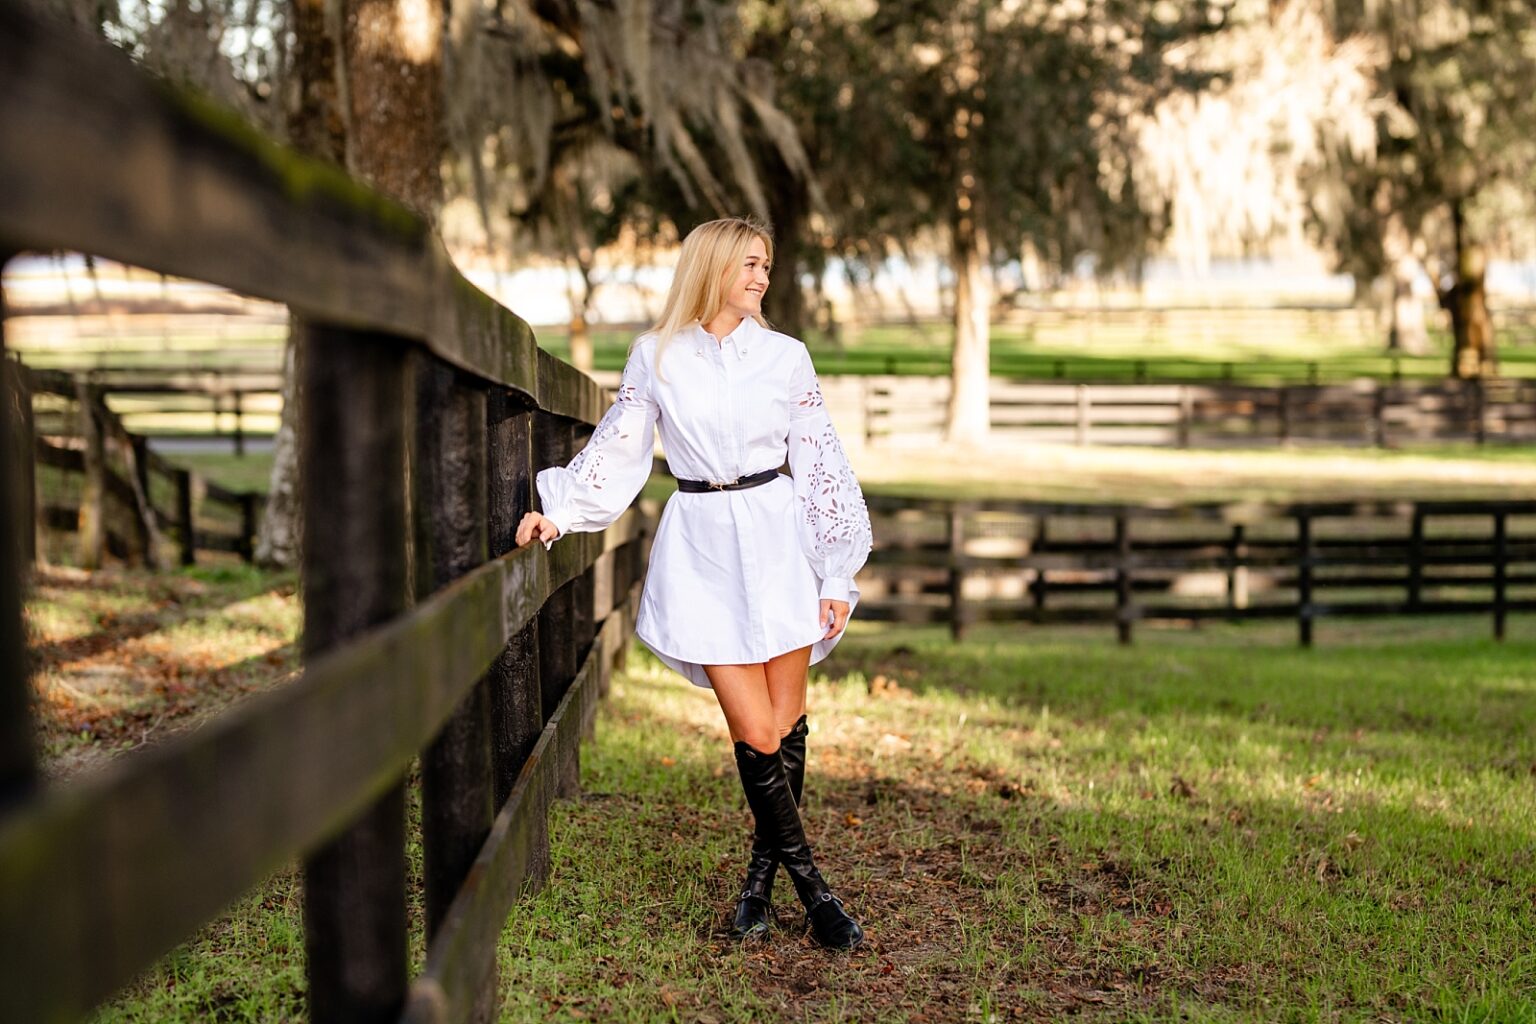 Equestrian inspired senior outfit for senior pictures. White dress with equestrian belt and tall boots. Ocala, FL. Hunter/jumper rider.